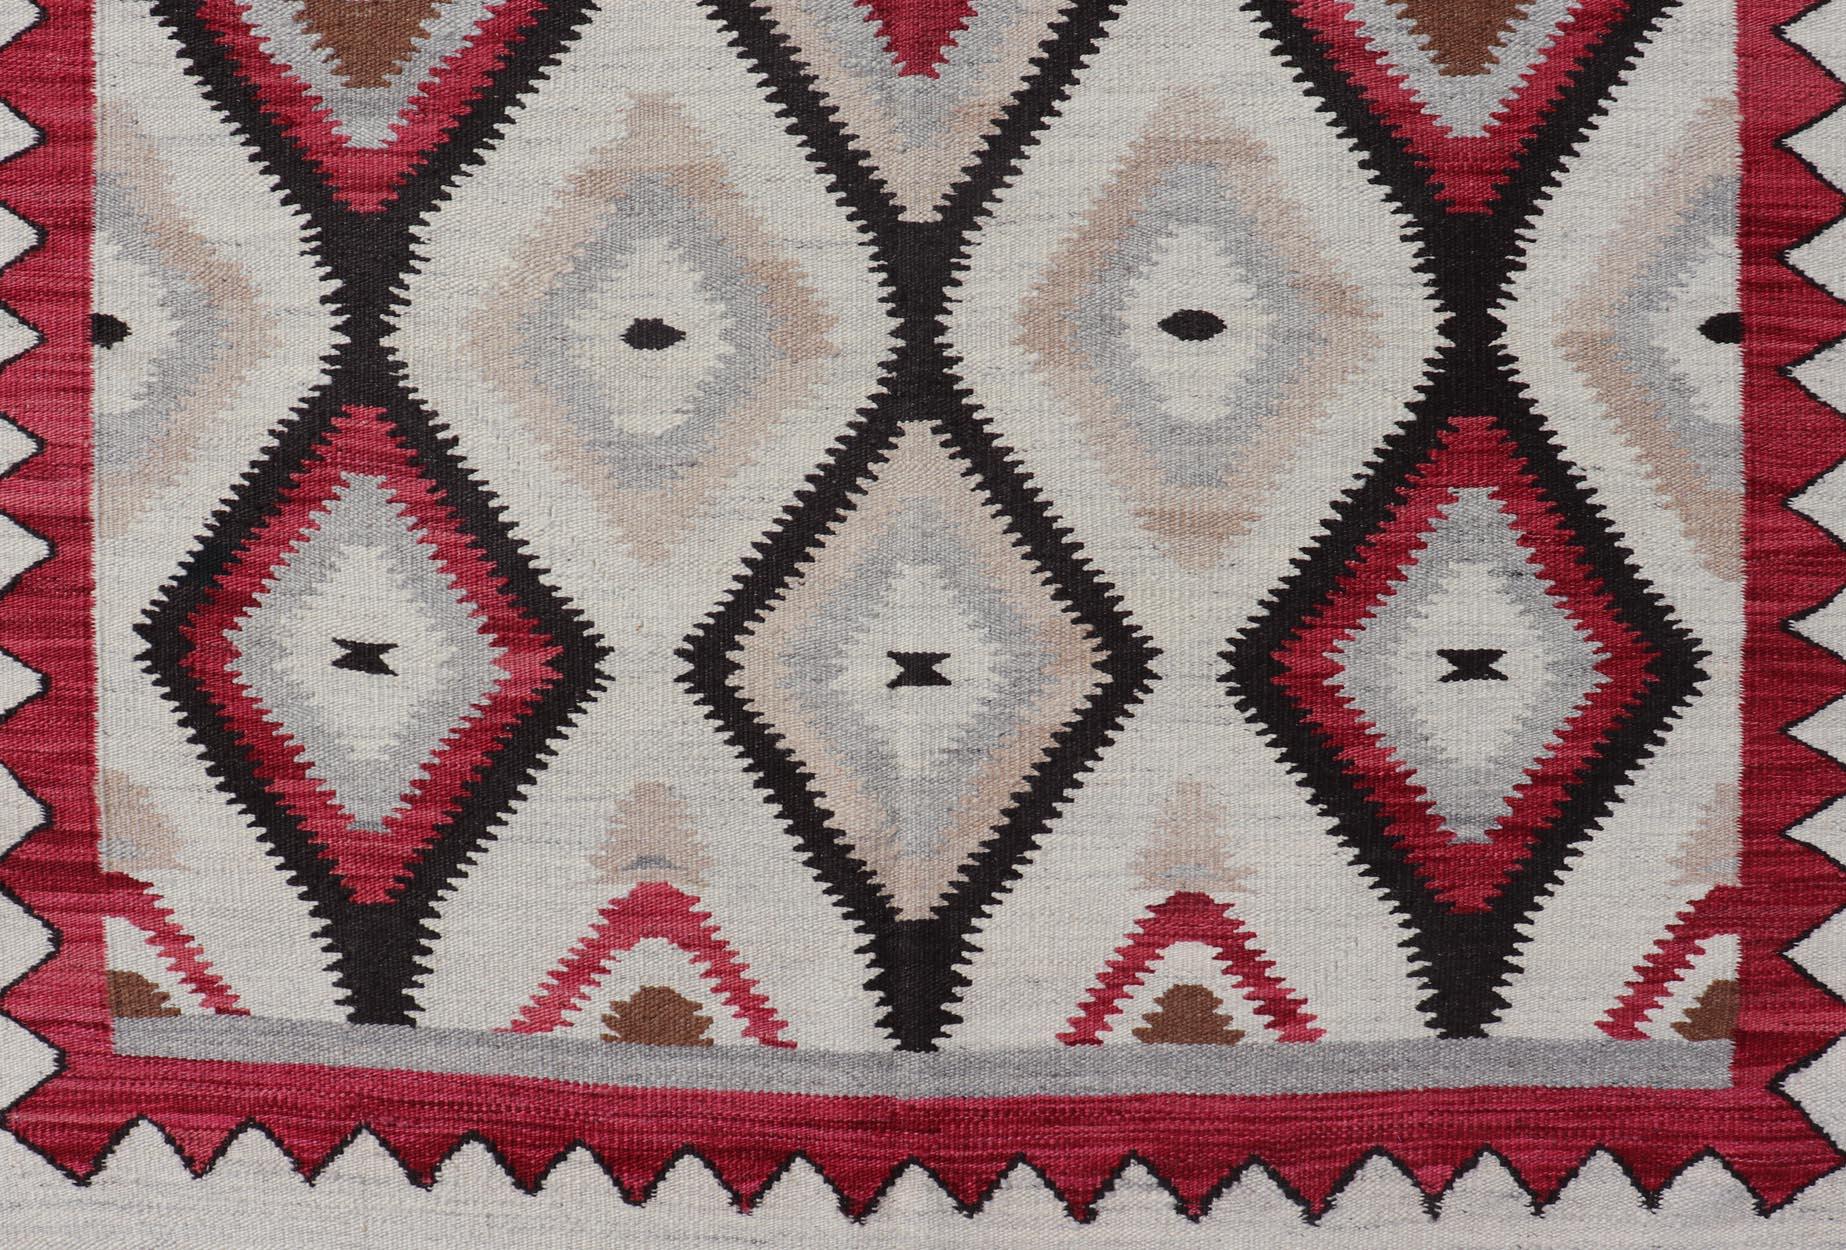 Contemporary American Navajo Design Rug with Latticework Tribal Design in Red, Black and Gray For Sale